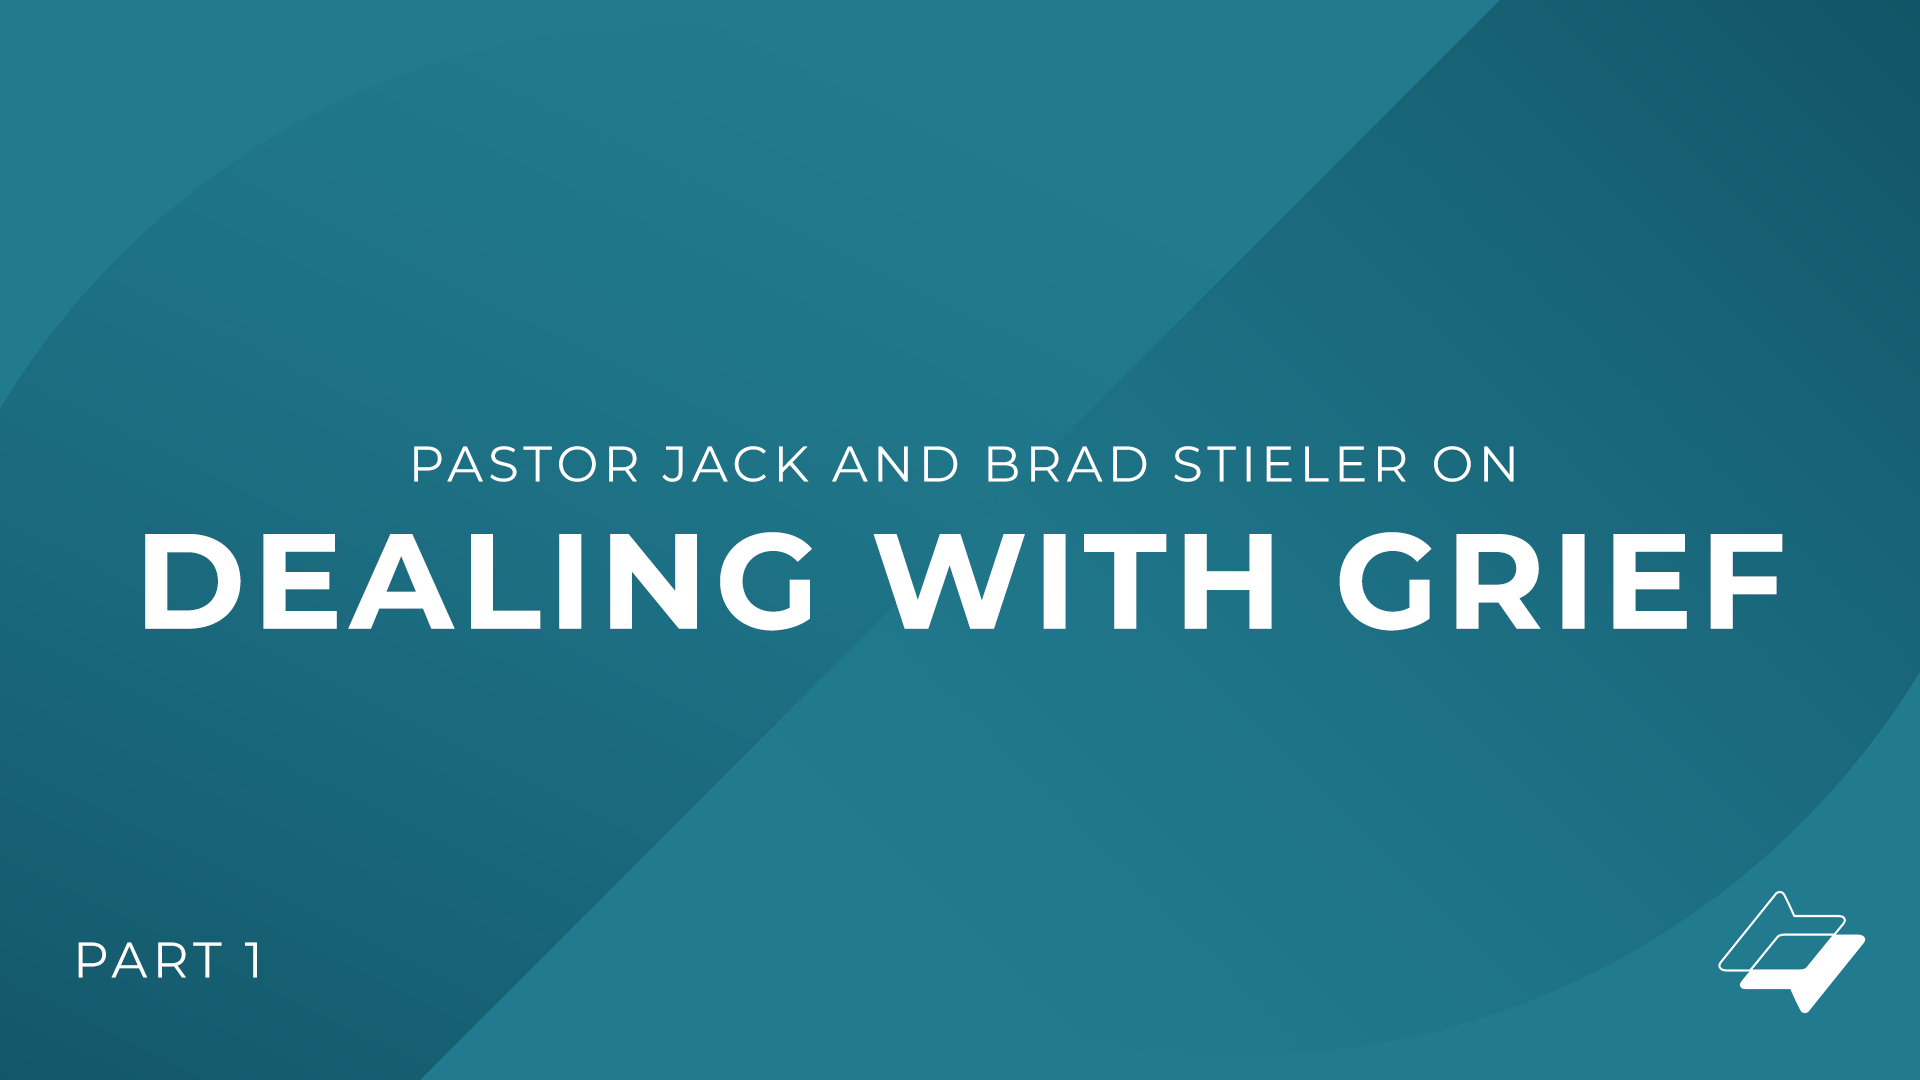 Pastor Jack and Brad Stieler on Dealing with Grief – Part 1